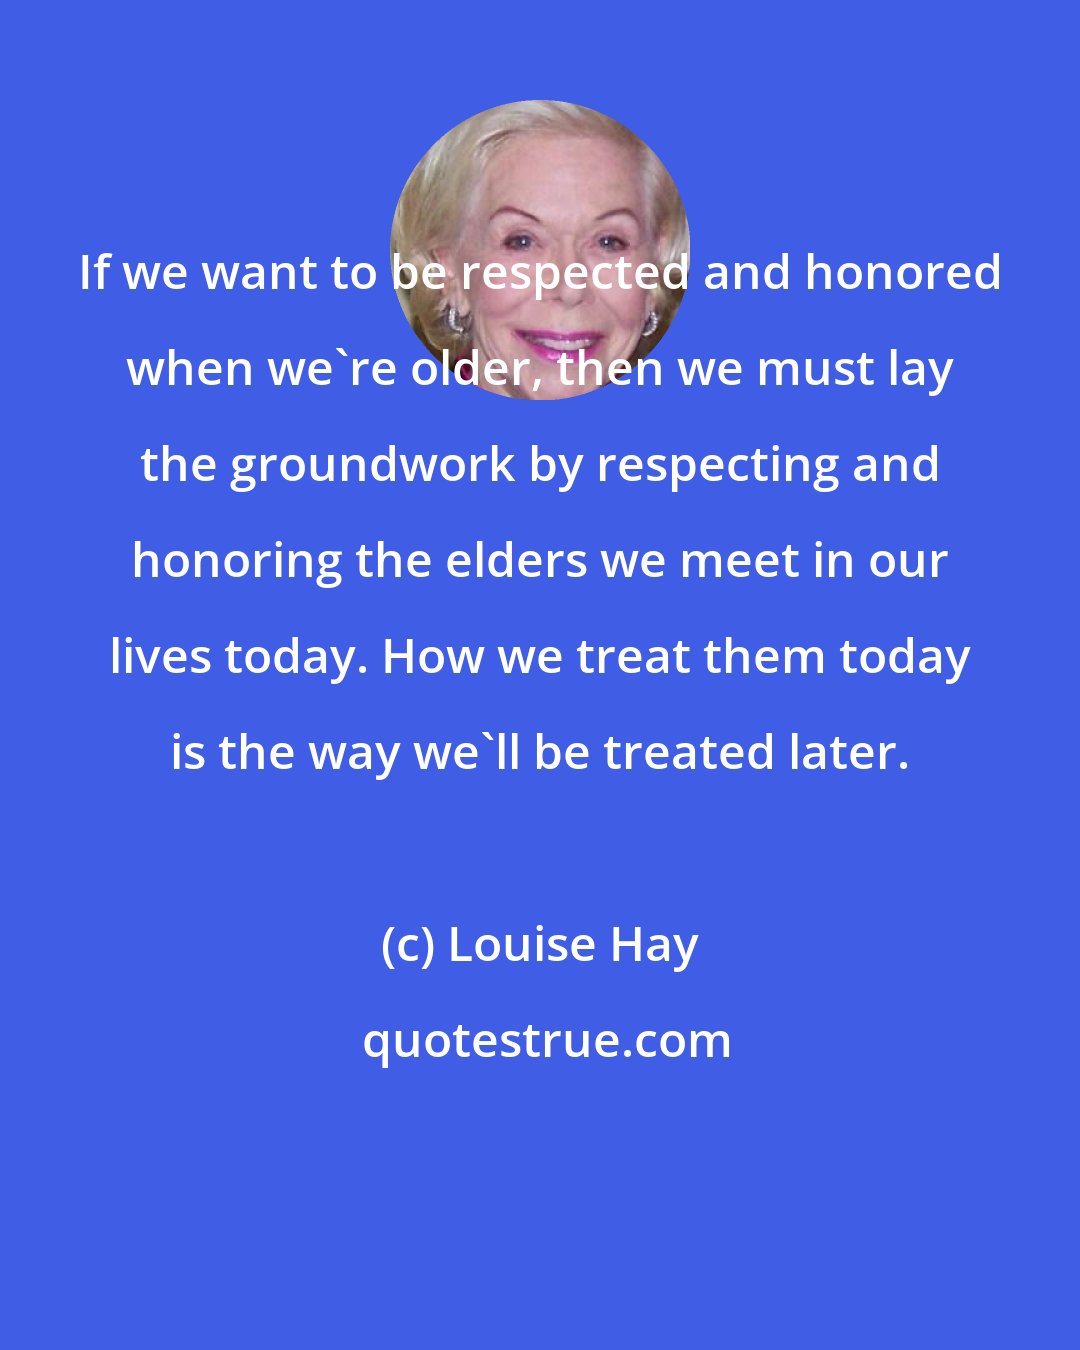 Louise Hay: If we want to be respected and honored when we're older, then we must lay the groundwork by respecting and honoring the elders we meet in our lives today. How we treat them today is the way we'll be treated later.